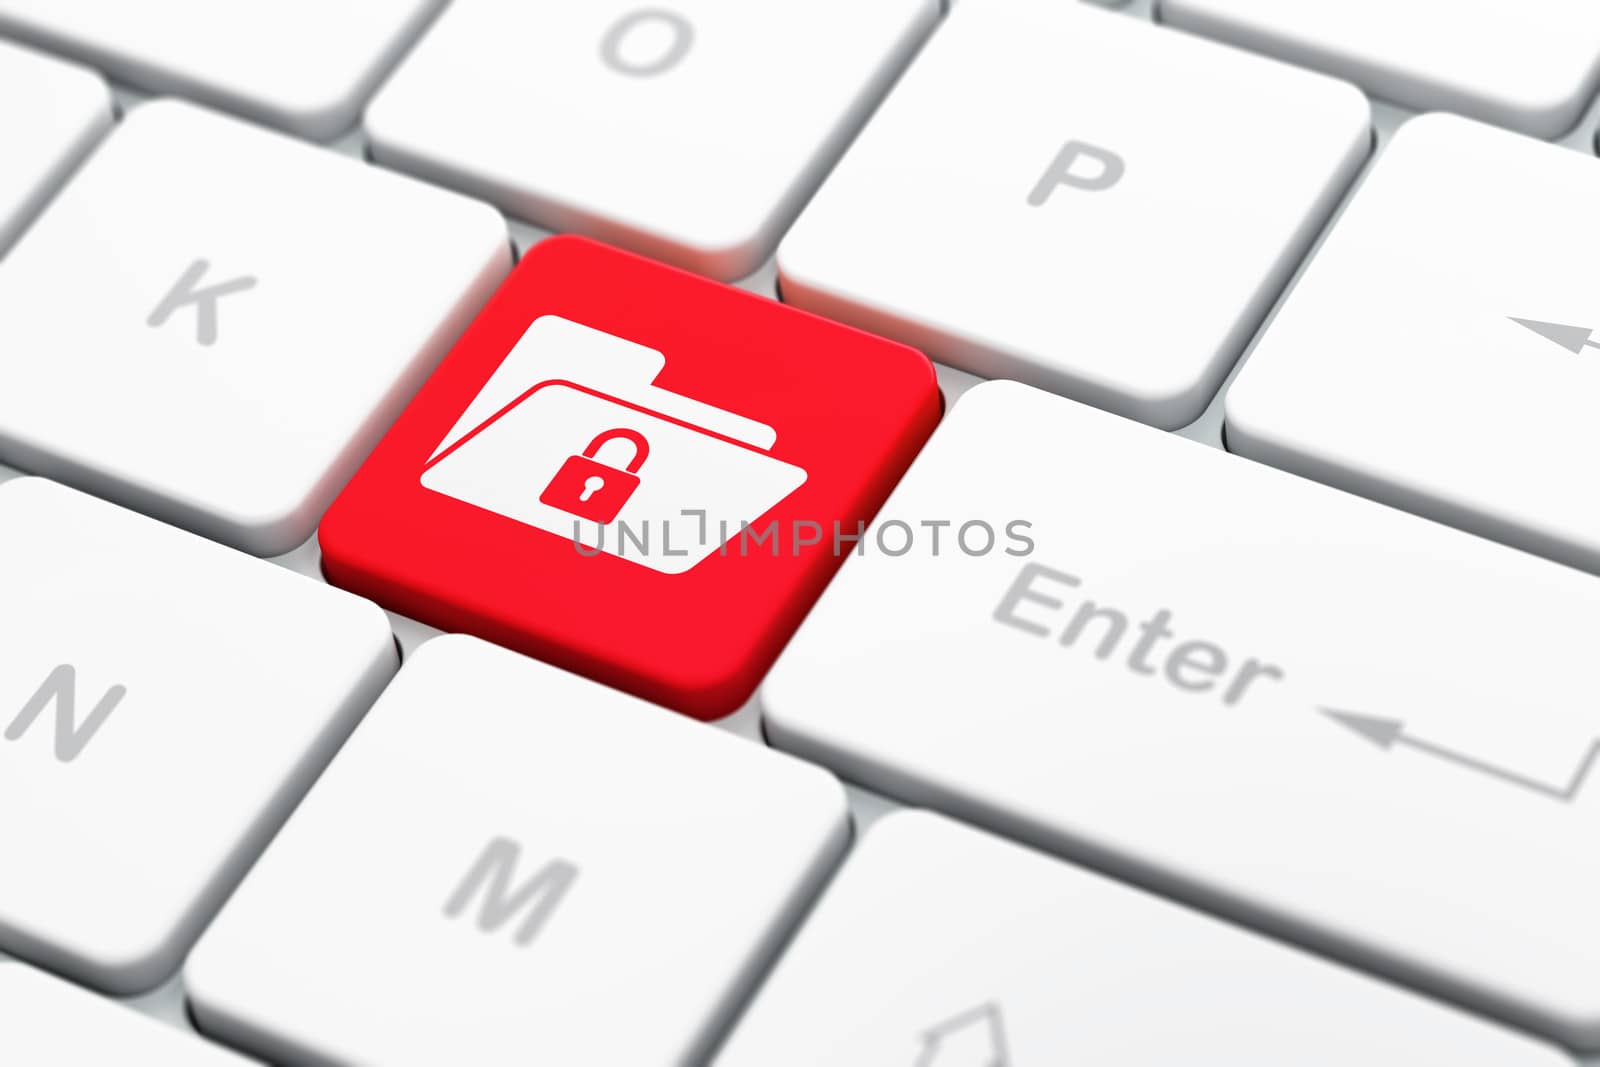 Finance concept: computer keyboard with Folder With Lock icon on enter button background, selected focus, 3d render